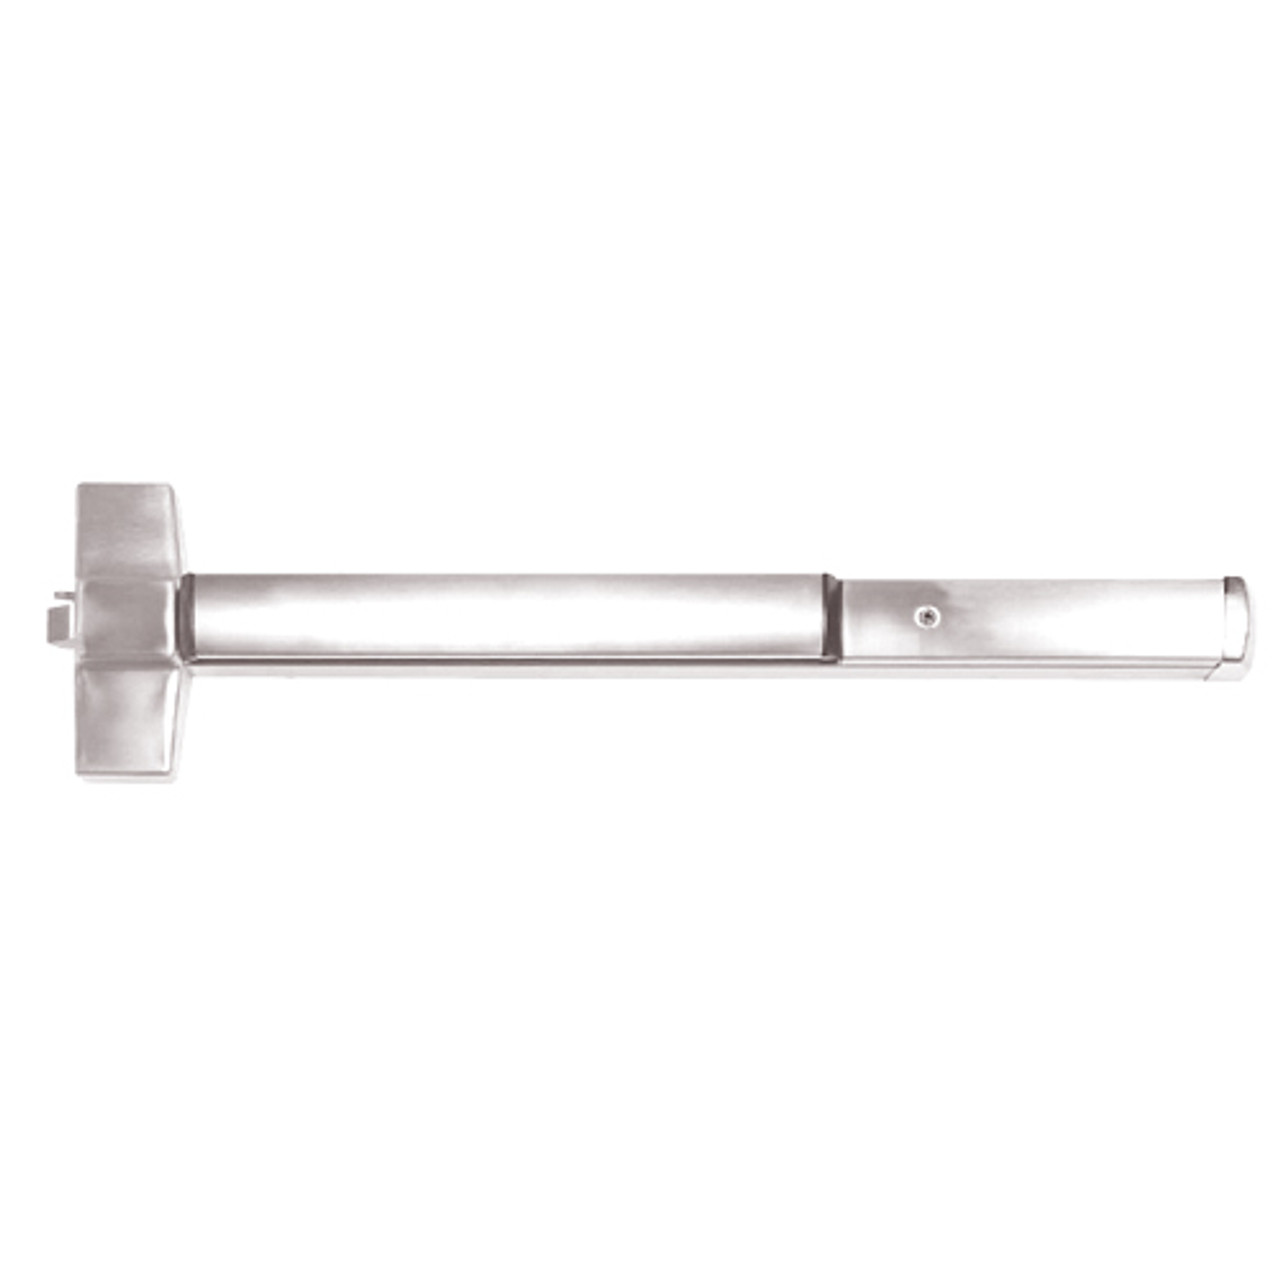 ED5200-629-M52 Corbin ED5200 Series Non Fire Rated Exit Device with Cylinder Dogging in Bright Stainless Steel Finish